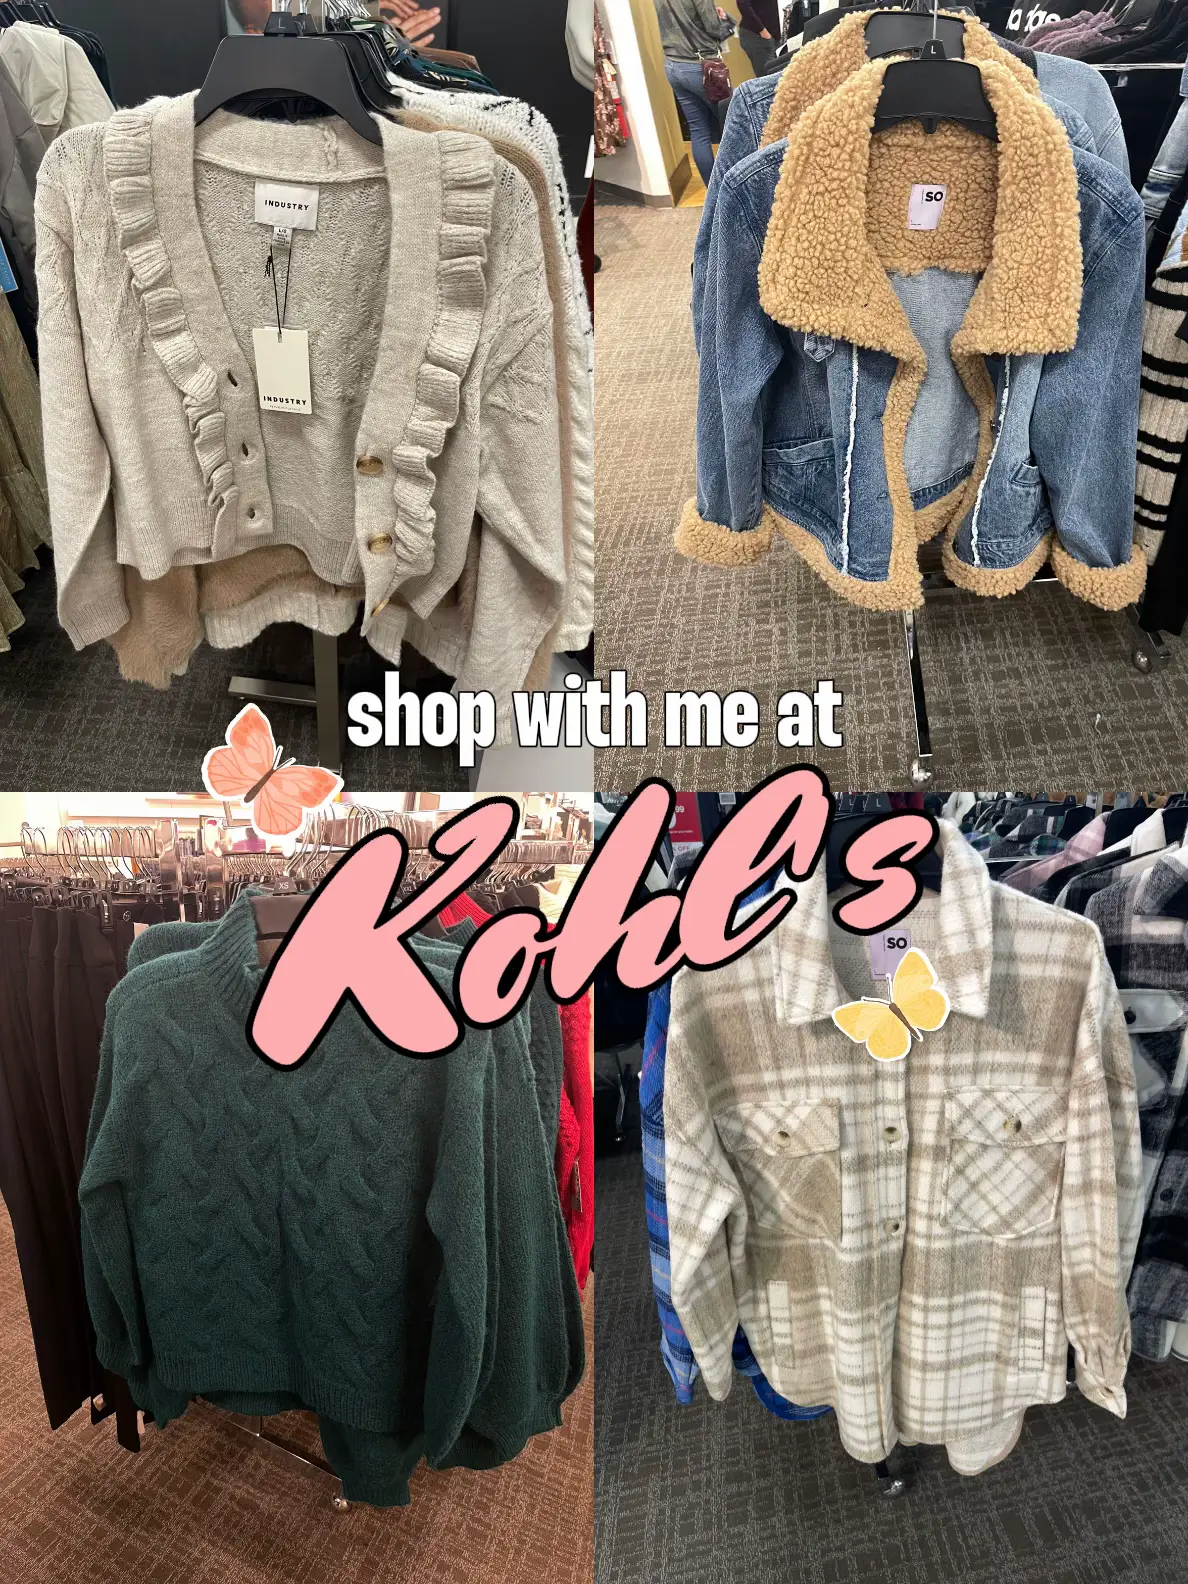 🔥KOHL'S CLEARANCE 70%OFF‼️KOHL'S CLOTHING TOPS & DRESS CLEARANCE SALE‼️ Kohl's SHOP WITH ME❤︎ 